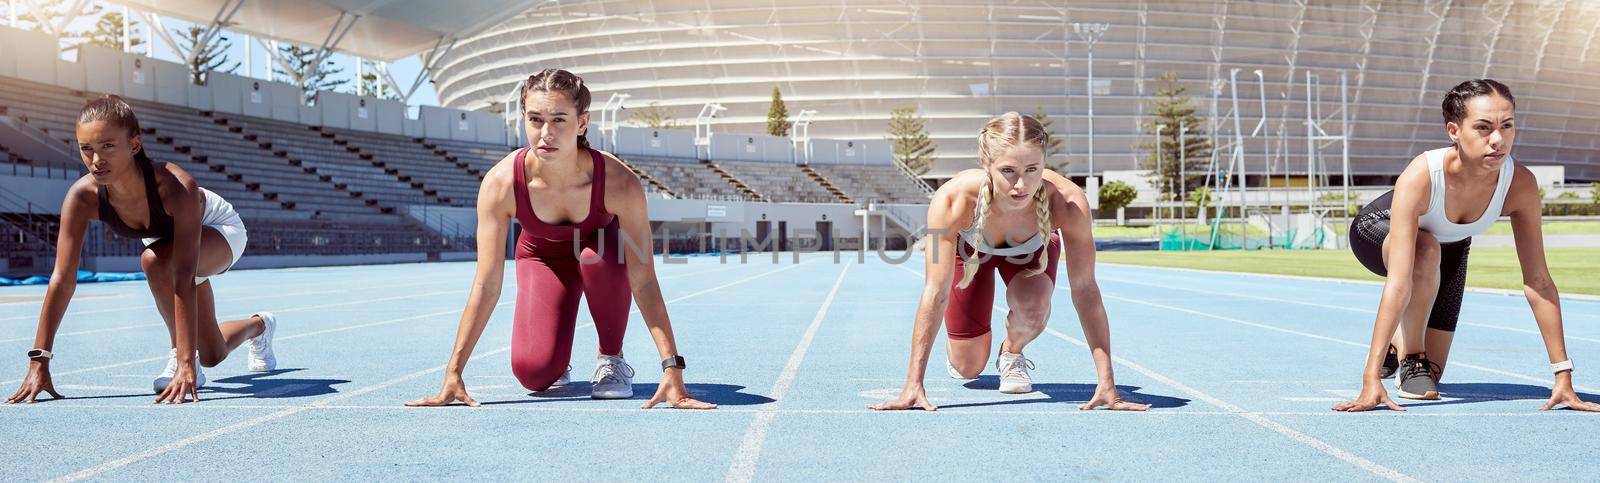 Group of determined female athletes in starting position to begin a sprint or running race on a sports track in a stadium. Focused and diverse women ready to compete in track and field olympic event by YuriArcurs